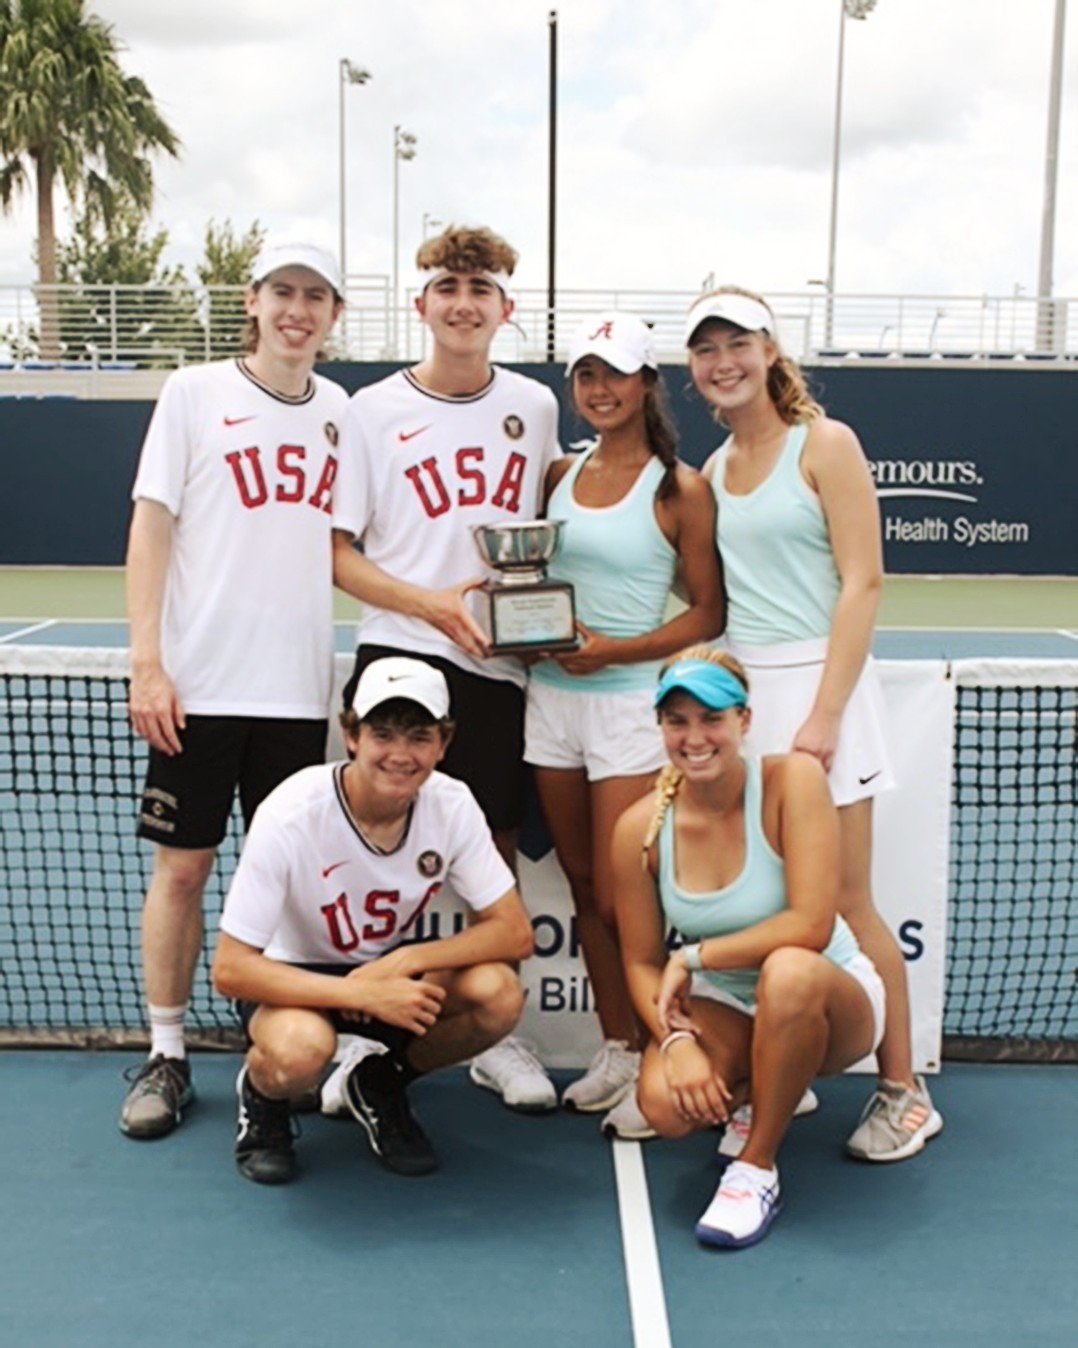 Carmel and Fishers high school tennis players help lead team to title